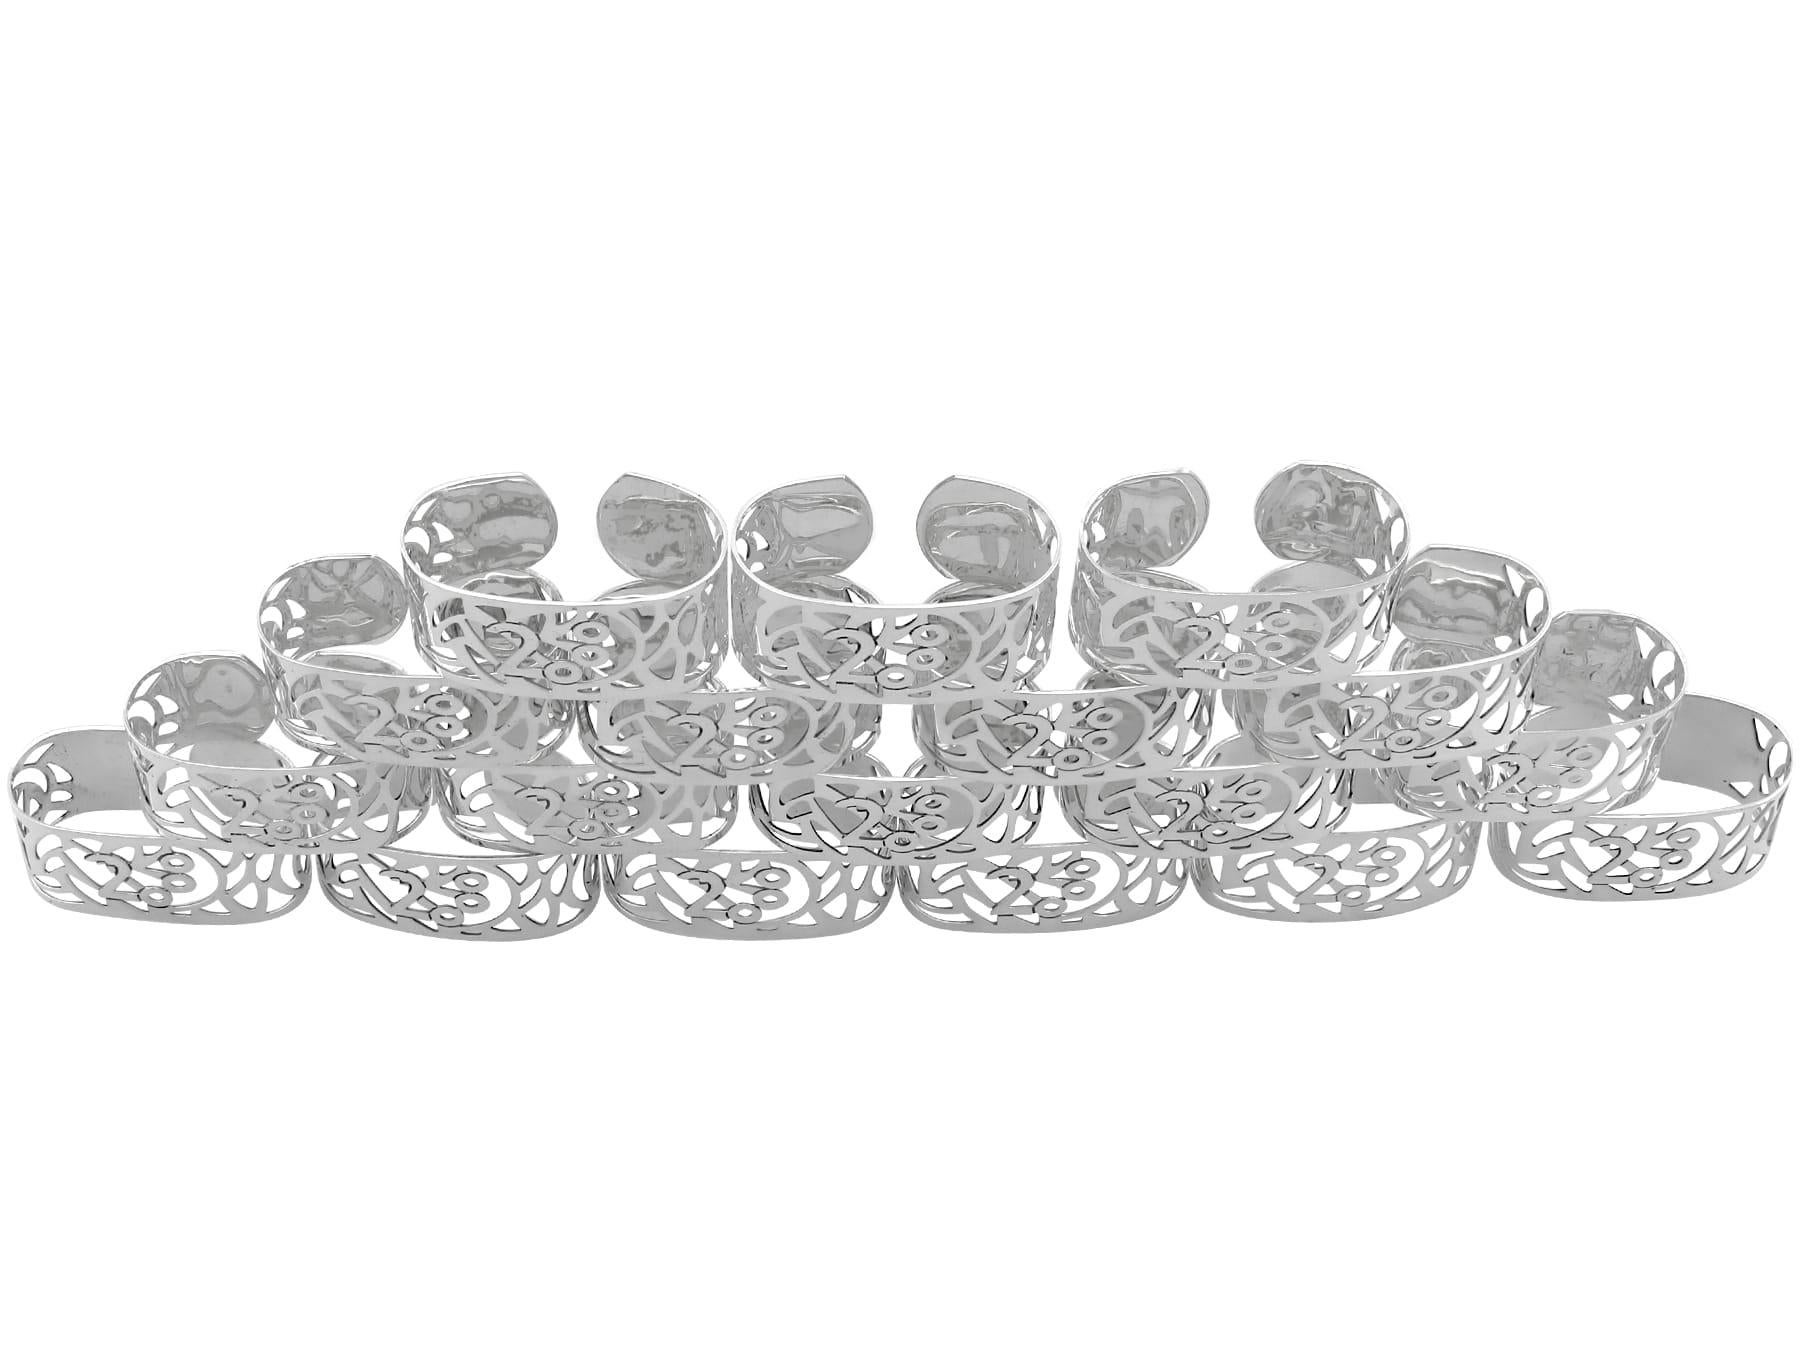 An exceptional, fine and impressive set of eighteen contemporary Elizabeth II English sterling silver millenium napkin rings; part of our dining silverware collection.

These exceptional contemporary English sterling silver napkin rings have a